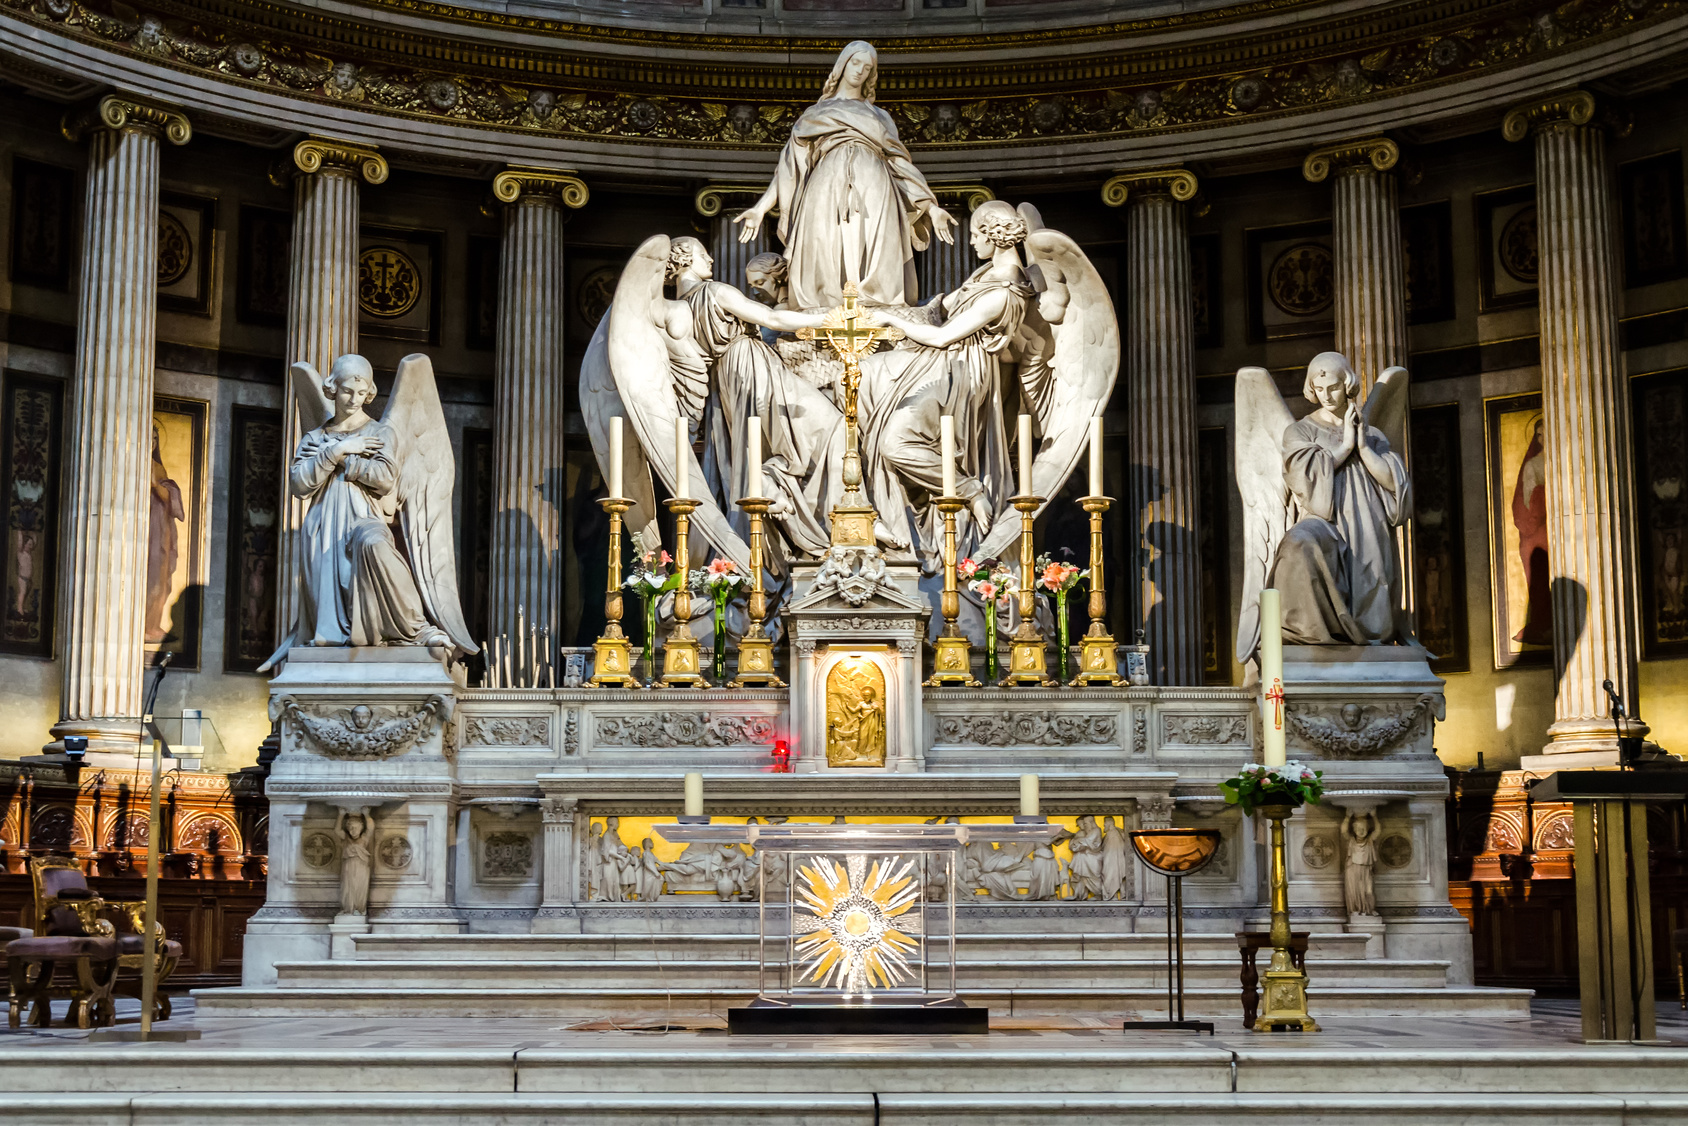 A Guide to the Religious Sites of Paris